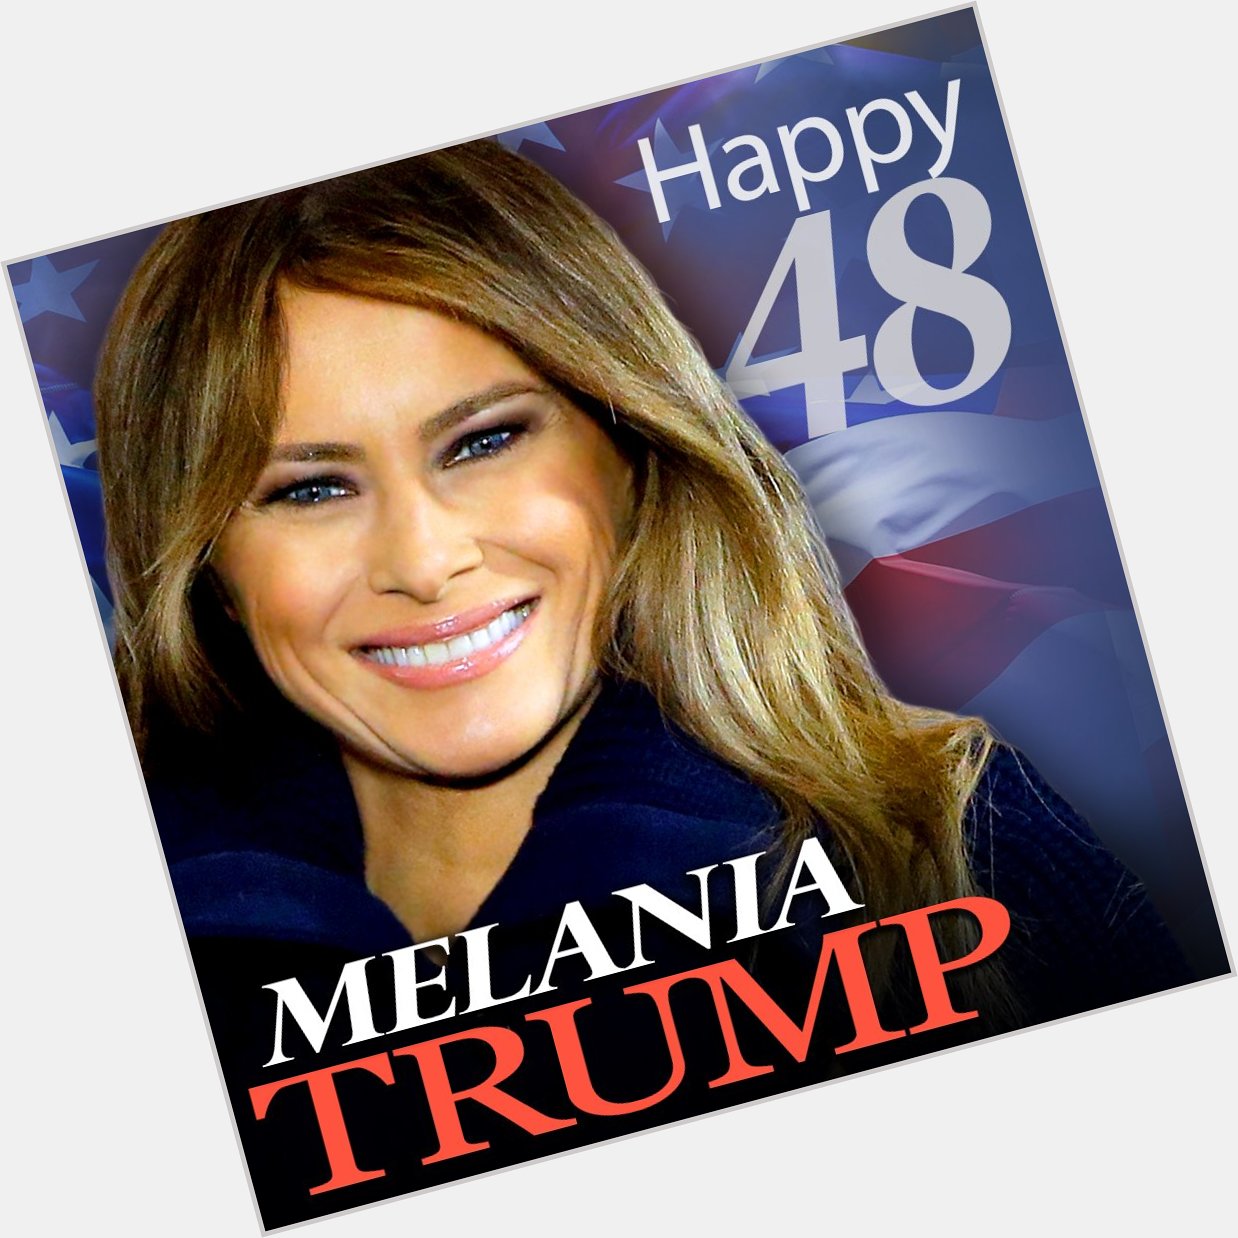 Happy birthday to the First Lady of the United States, Melania Trump!   